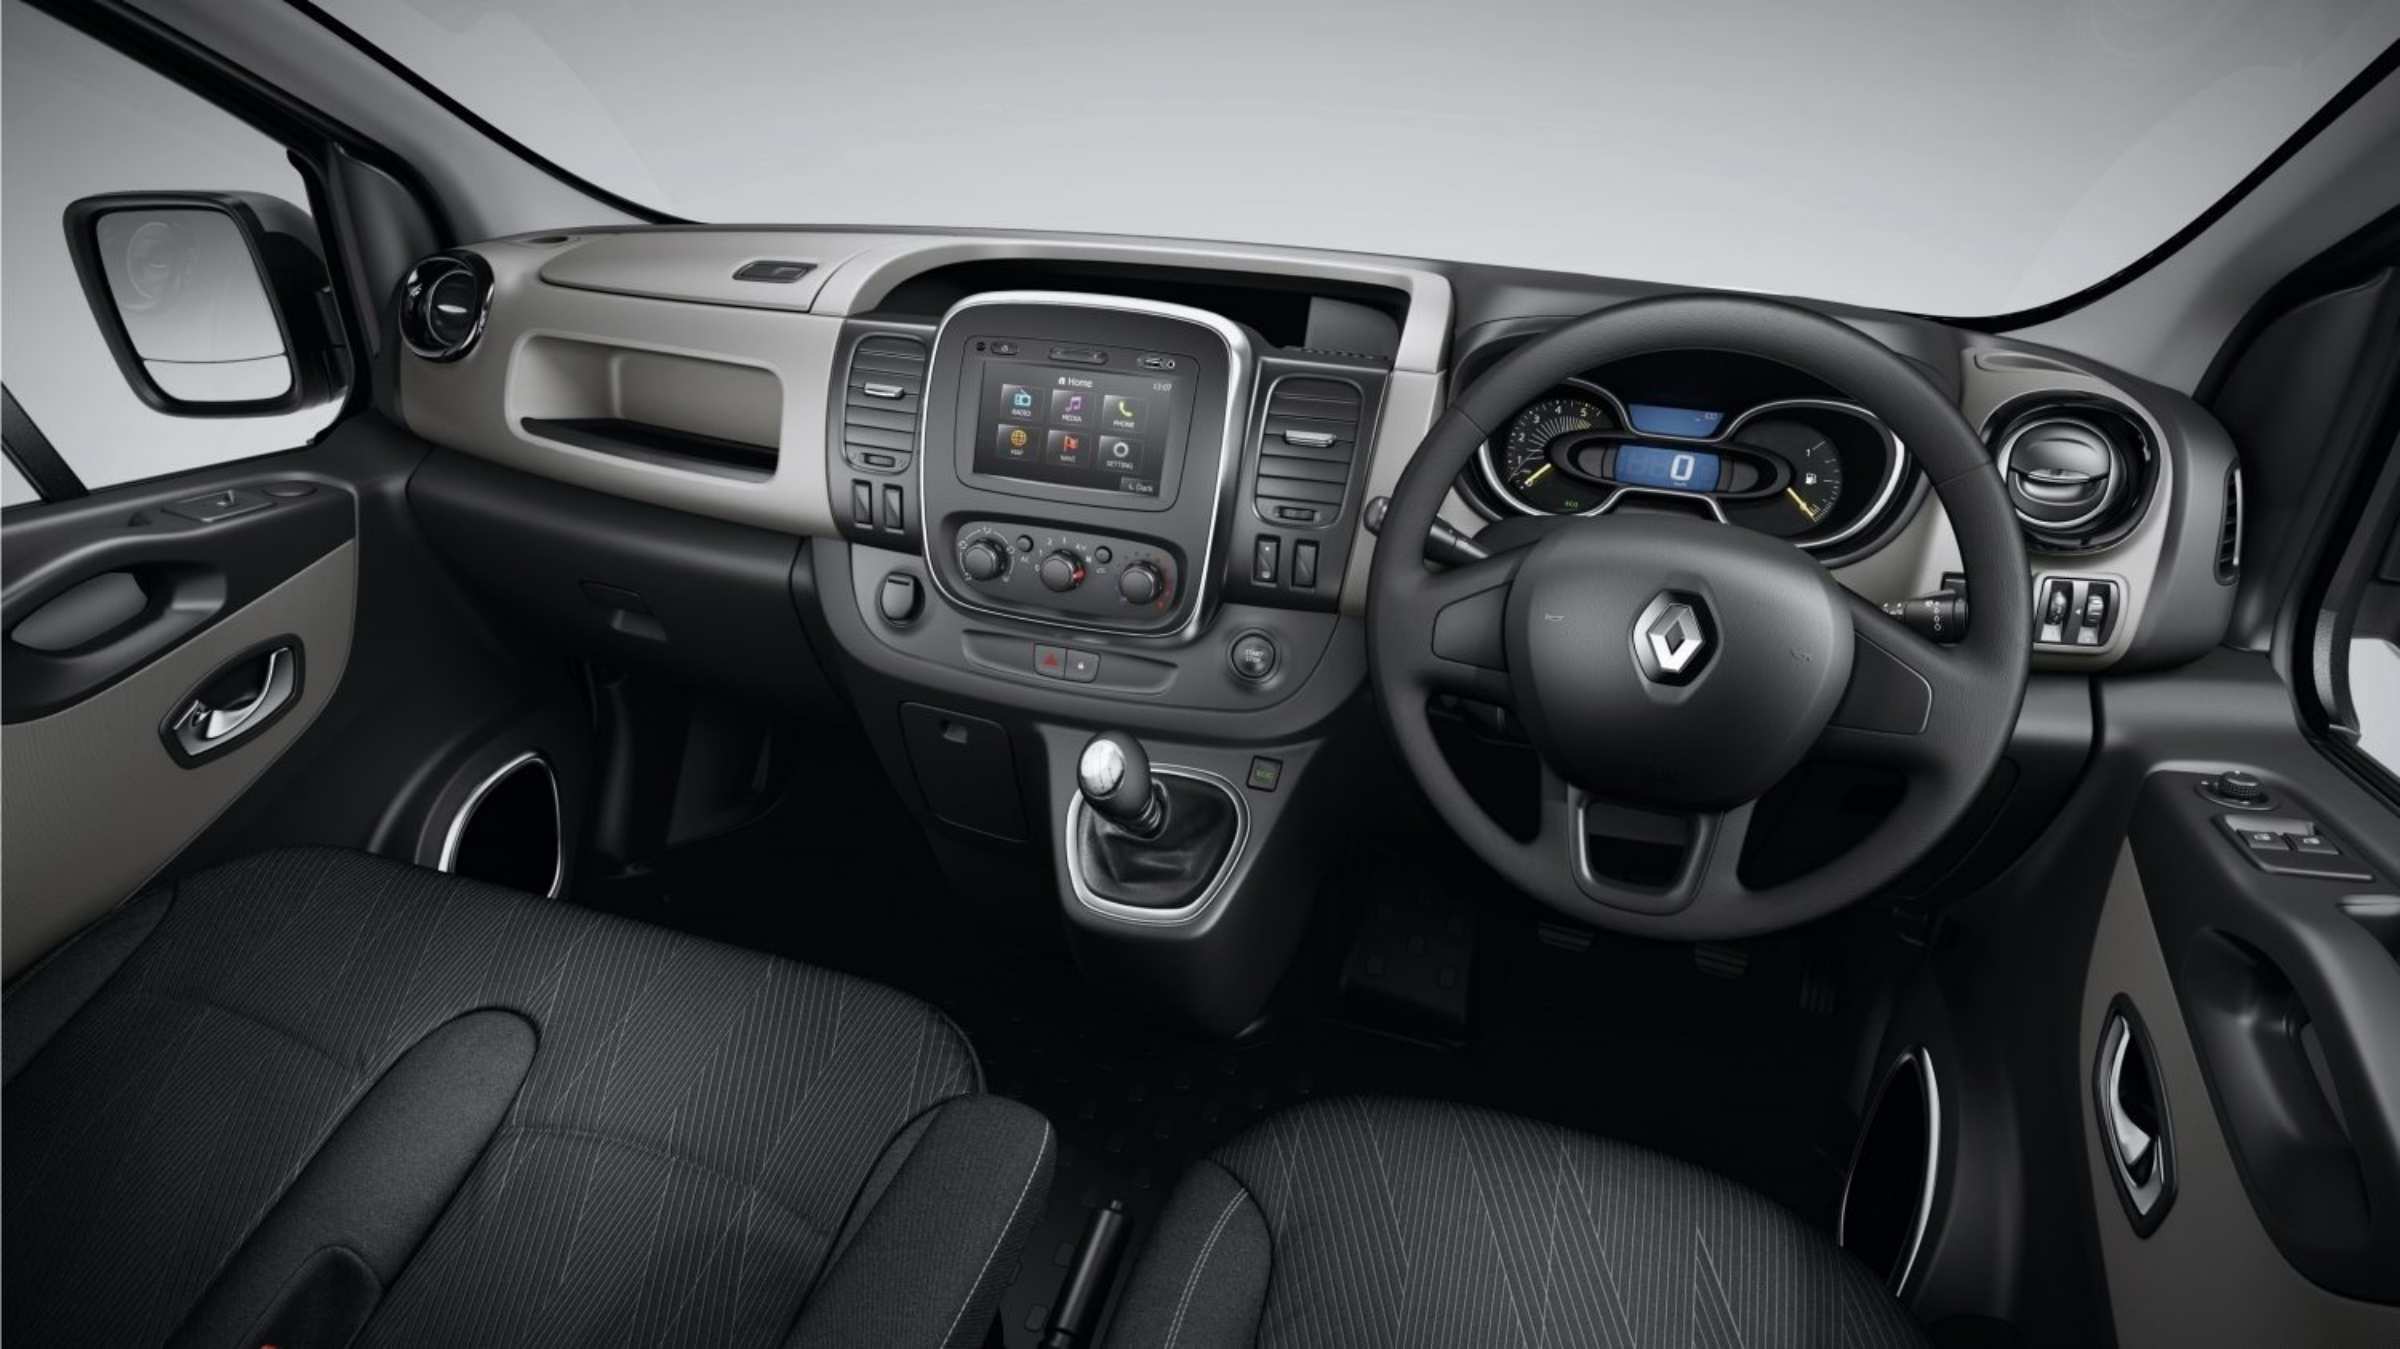 Disclose Temperate Splendor Renault Trafic Automatic 2020 Review | Ute and Van Guide